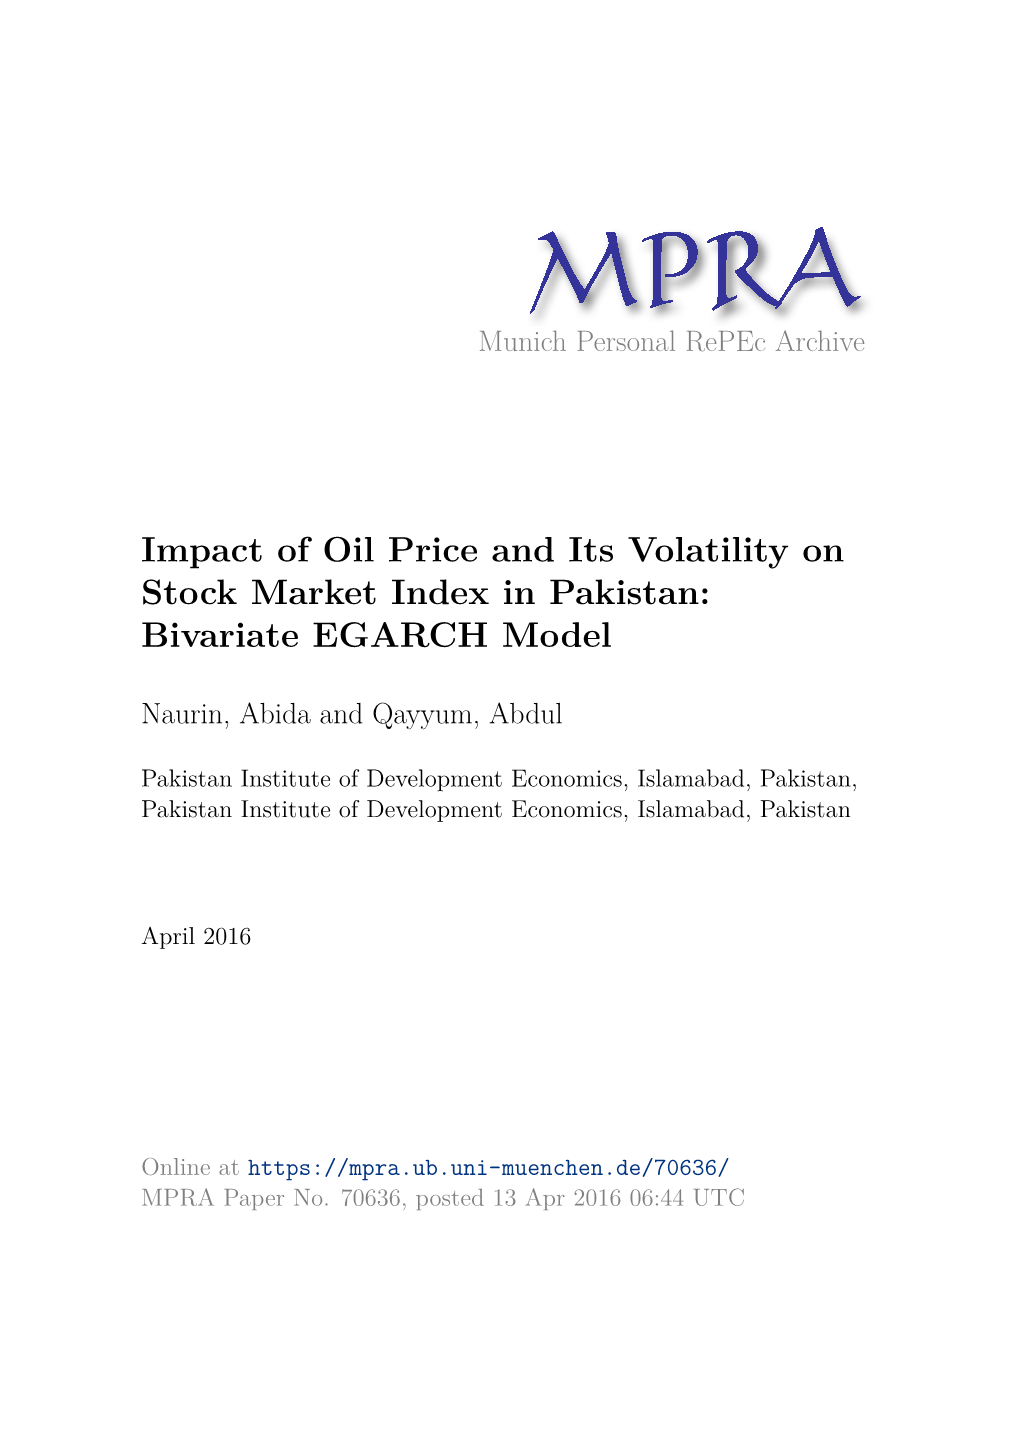 Impact of Oil Price and Its Volatility on Stock Market Index in Pakistan: Bivariate EGARCH Model